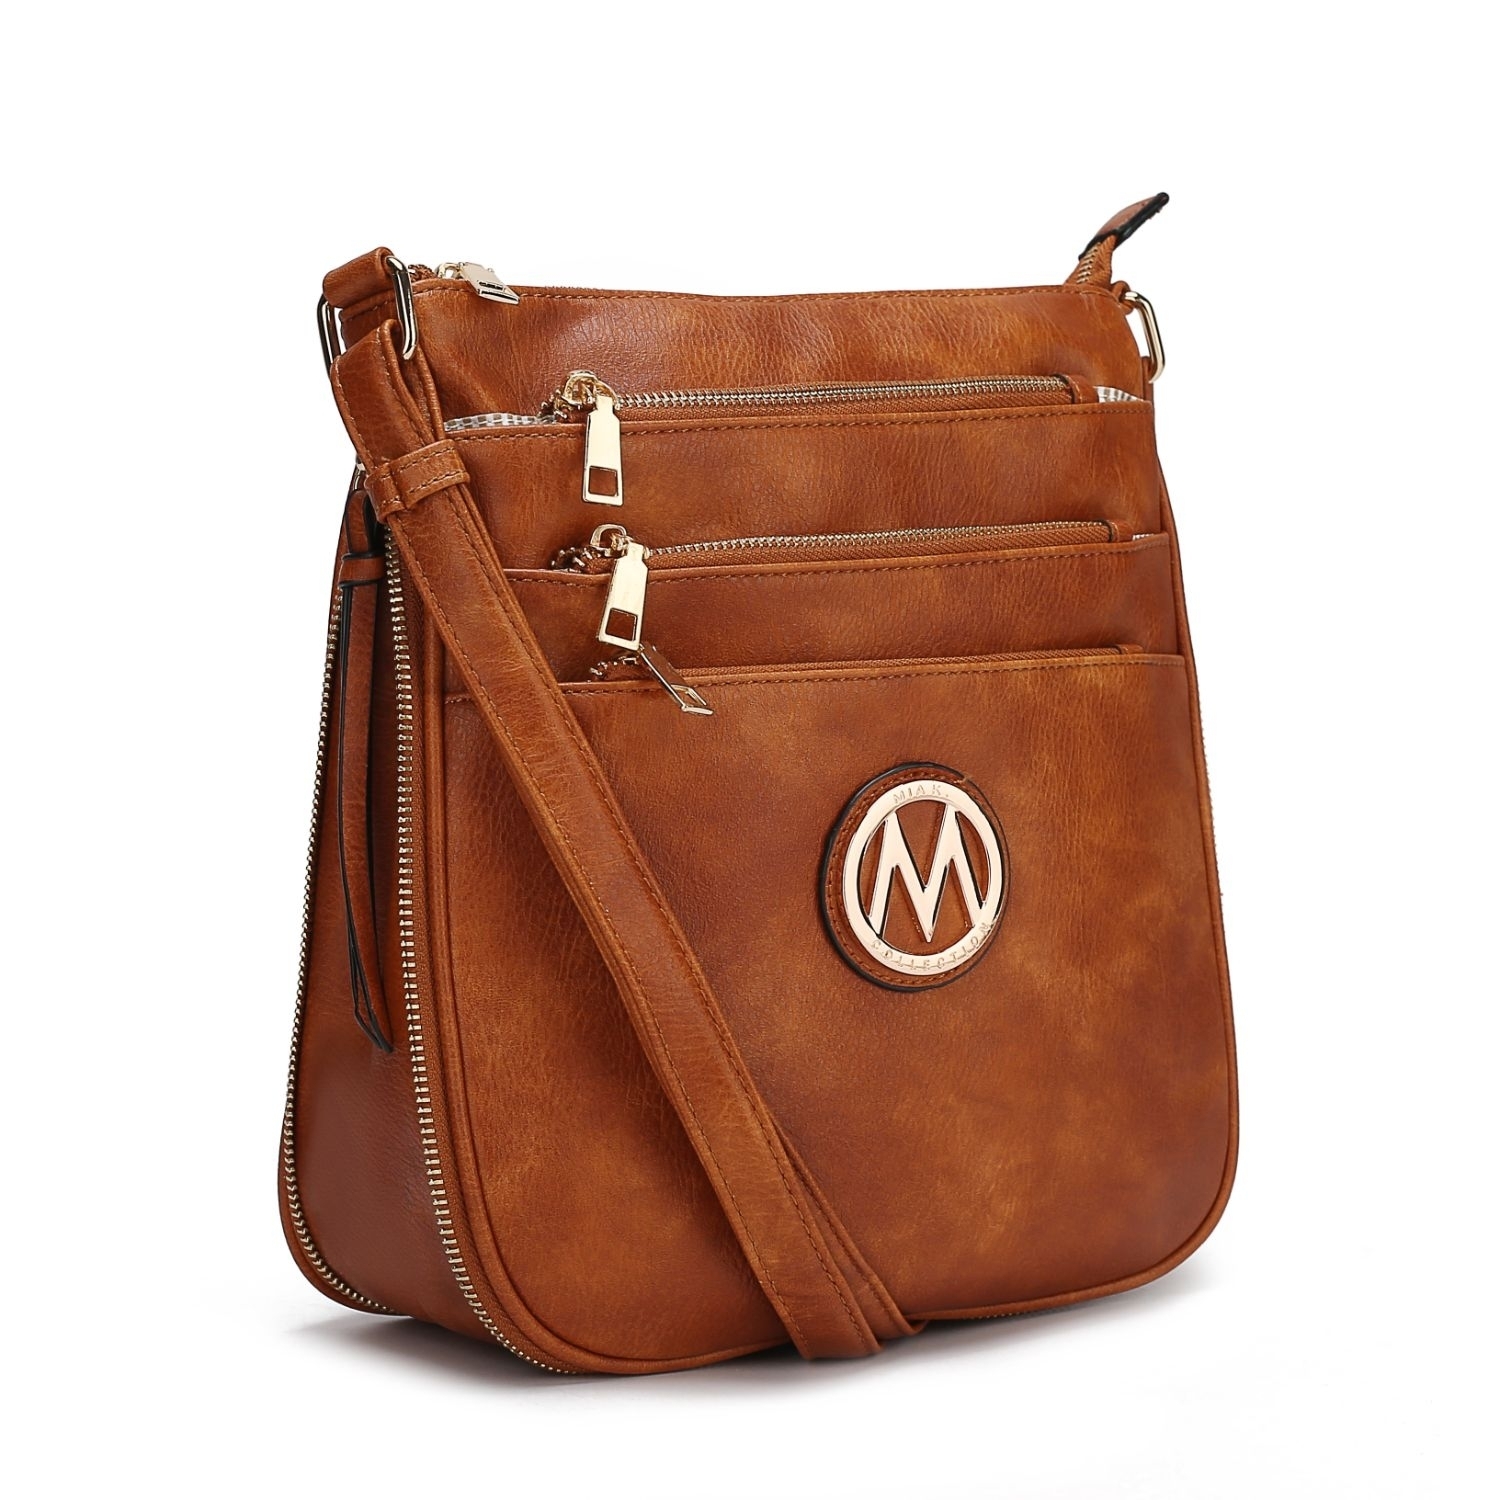 MKF Collection Salome Expandable Multi-Compartment Cross Body By Mia K. Handbag - Cognac Brown